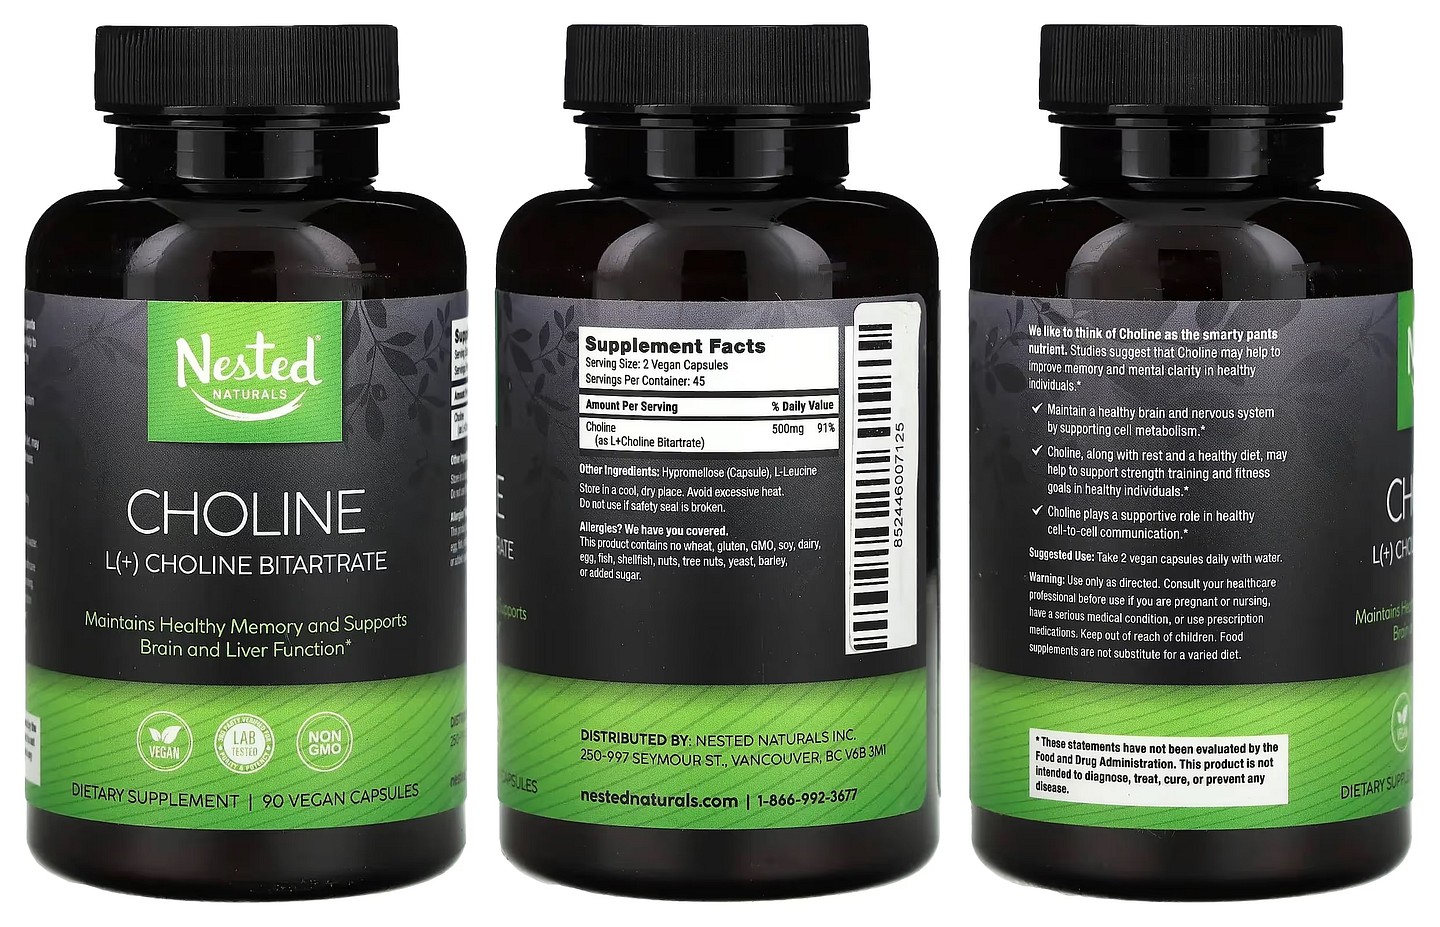 Nested Naturals, Choline packaging